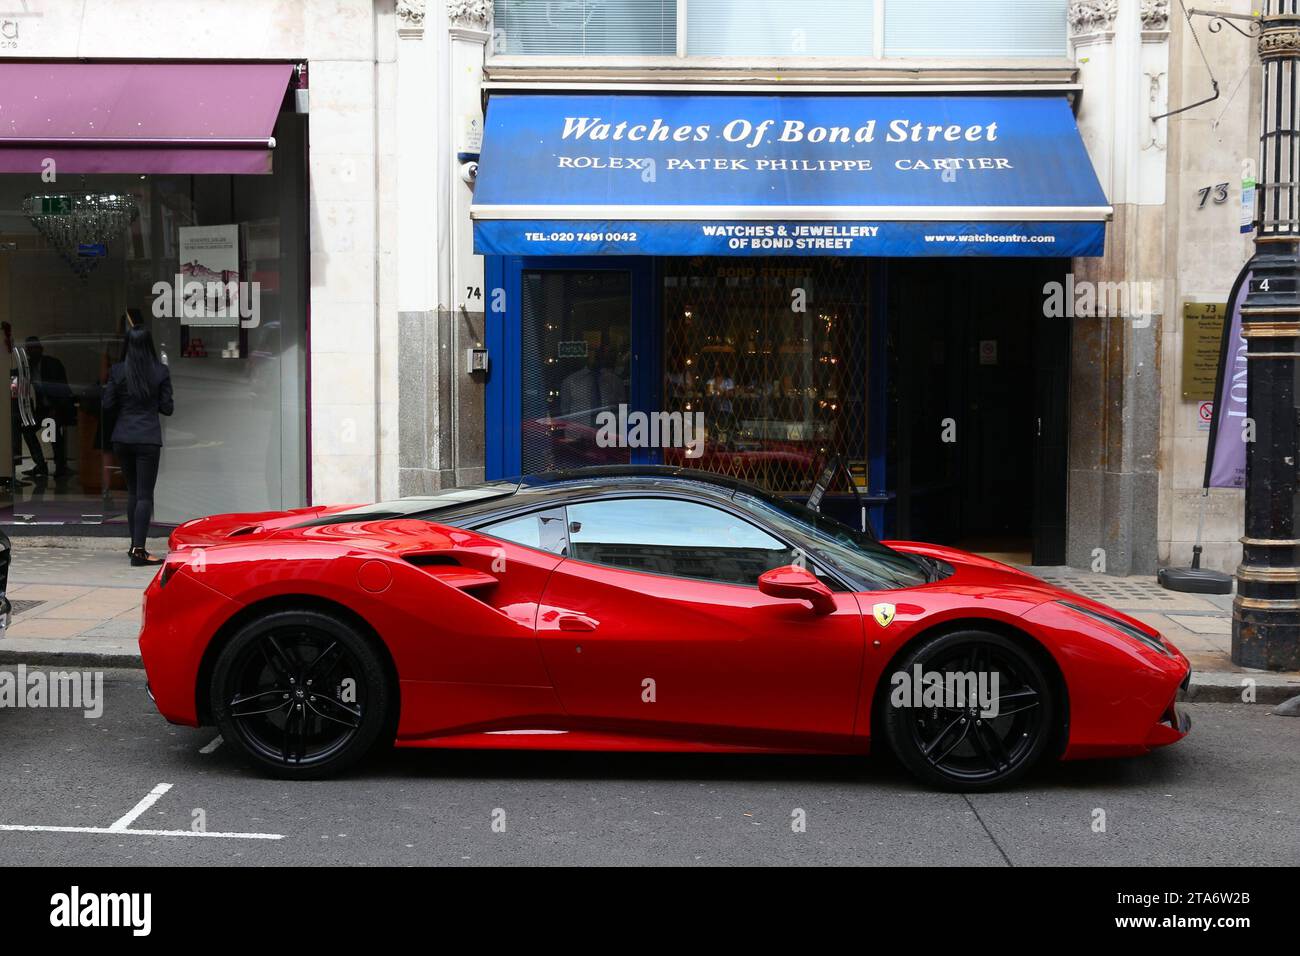 LONDON, UK - JULY 7, 2016: Ferrari sports car parked at New Bond Street in London. Bond Street is a major shopping street in the West End of London. Stock Photo